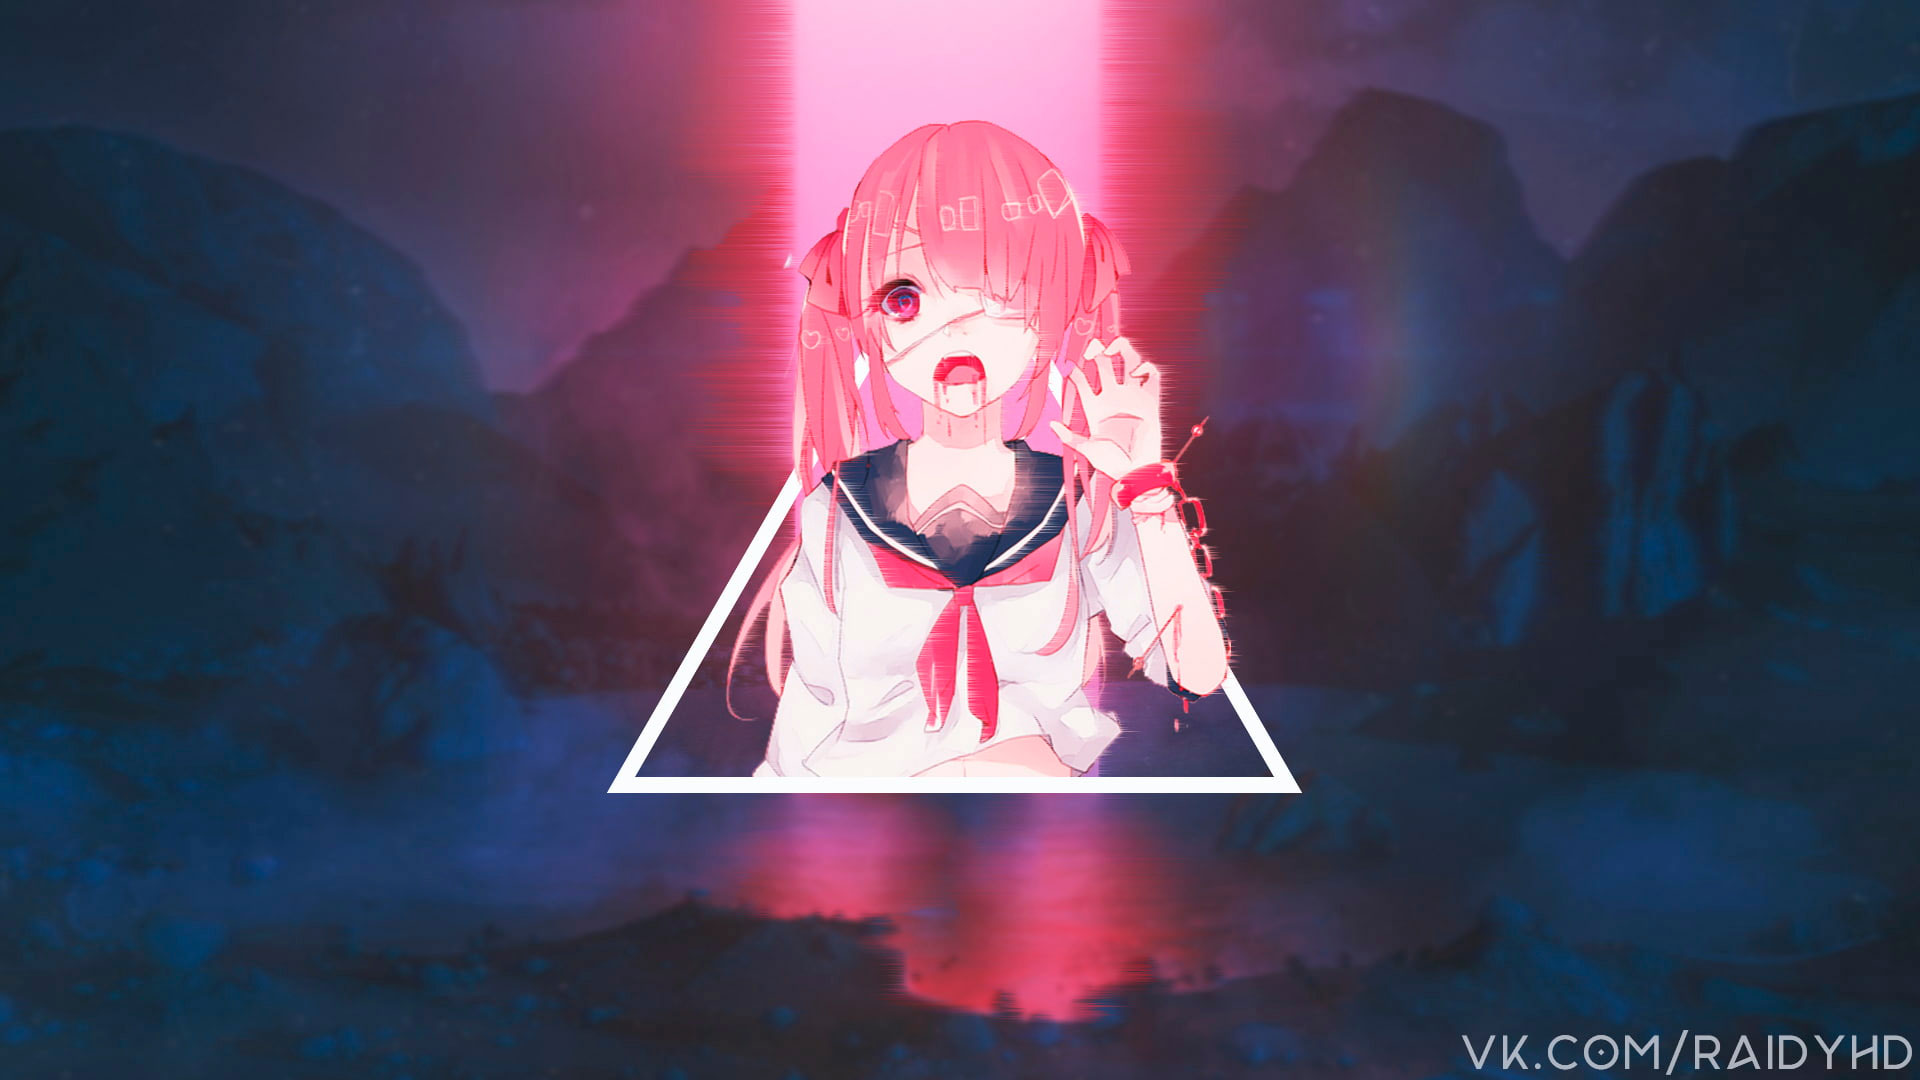 Anime Wallpaper, Anime Girls, Glitch Art, Picture-in-picture, Front View -  Wallpaperforu